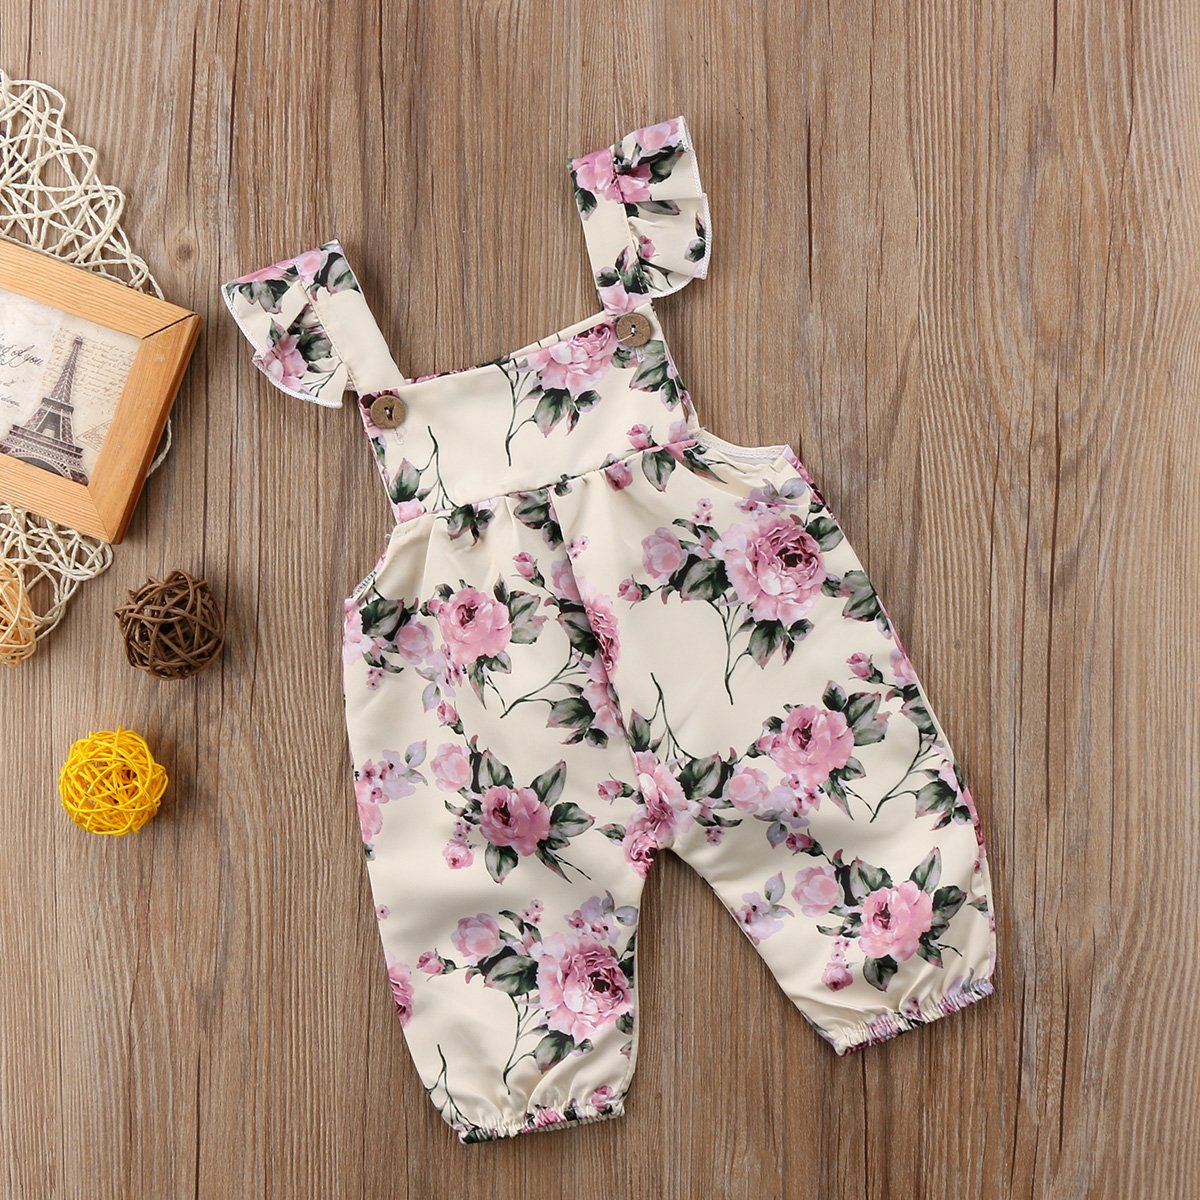 Toddler Baby Girls Flower Strap Romper: Adorable Playsuit Outfit for Summer